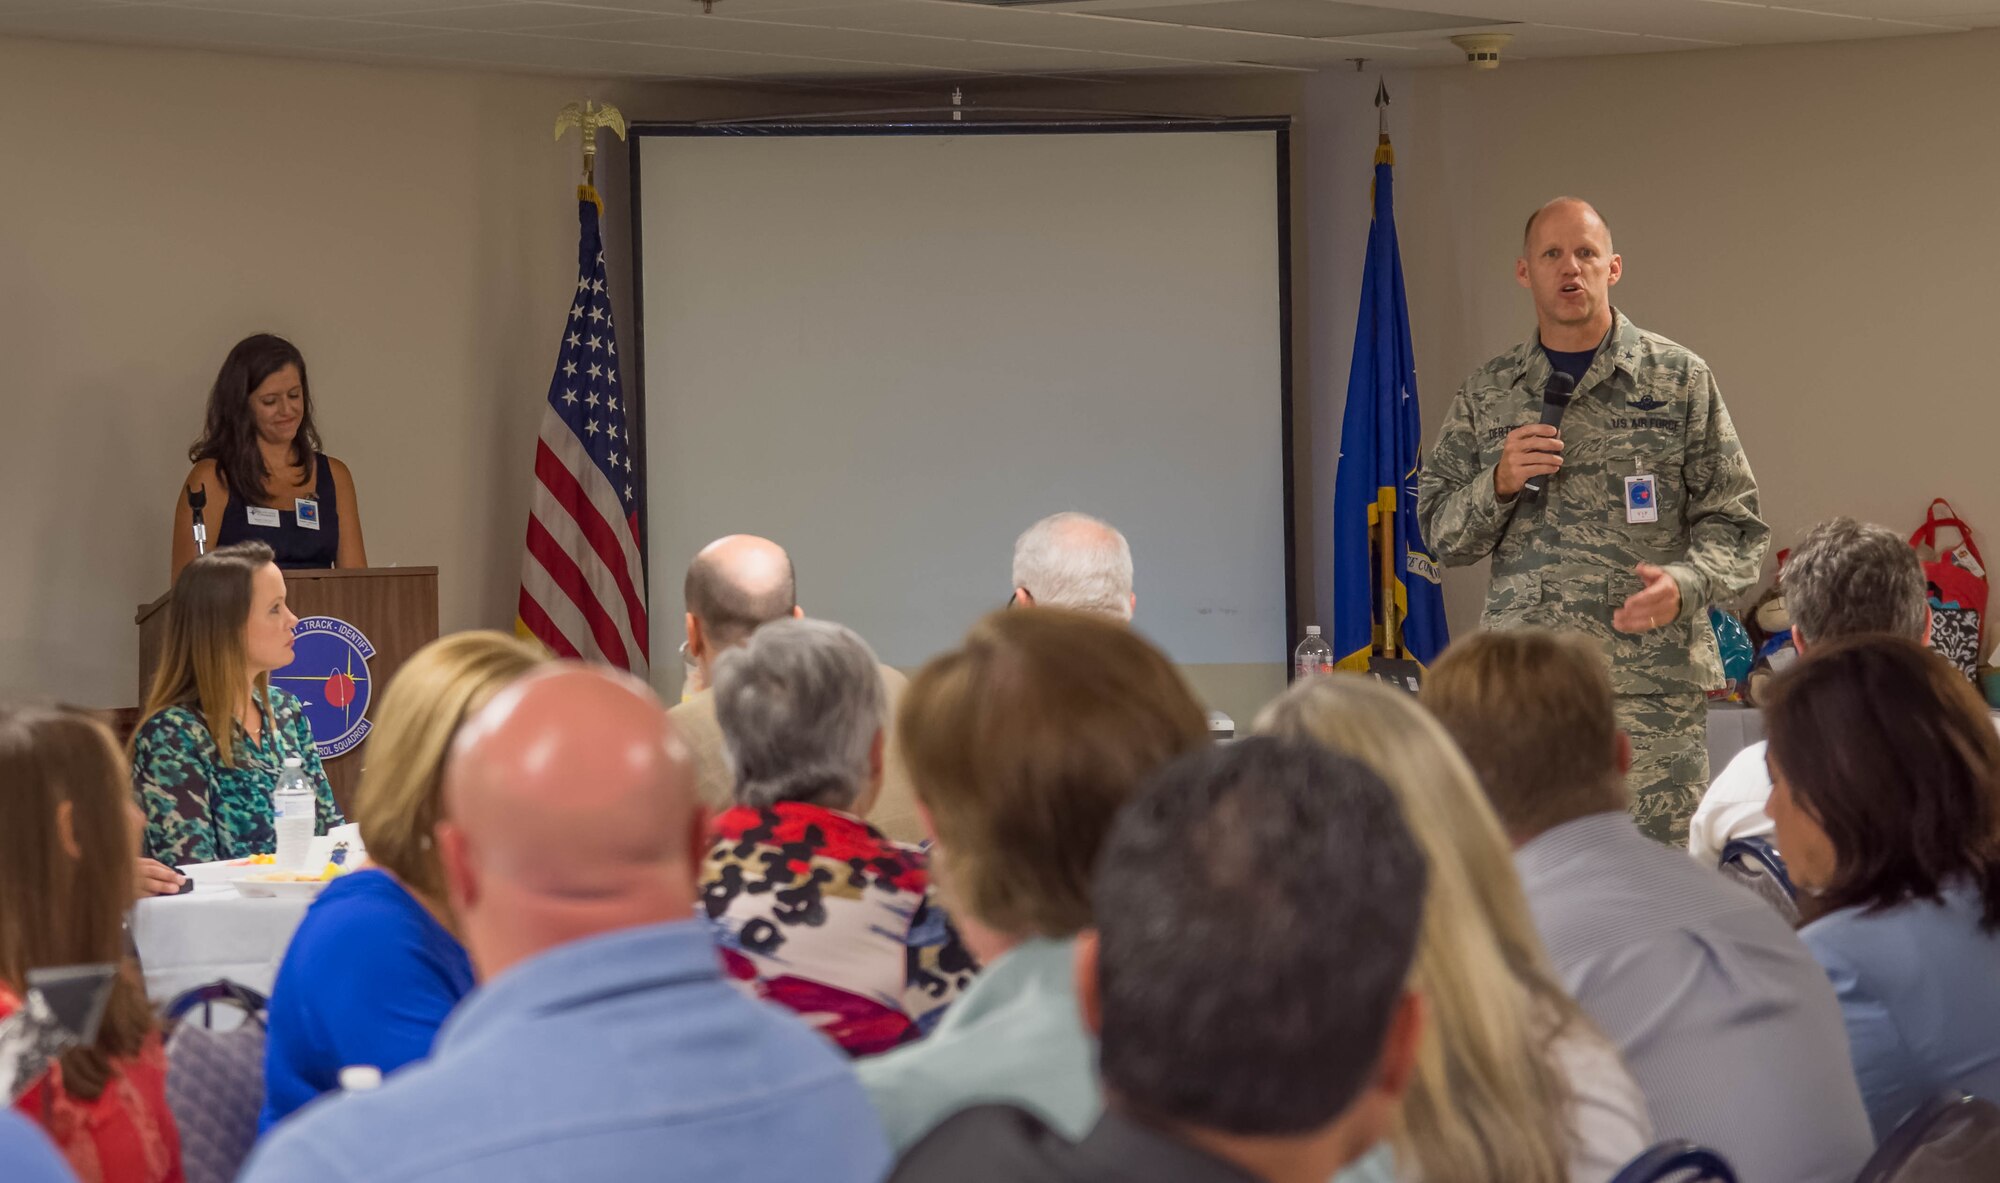 Brigadier General Evan Dertien, 96th Test Wing commander, welcomes attendees and thanks the community for their continuous support at the Walton County Chamber of Commerce First Friday Breakfast.